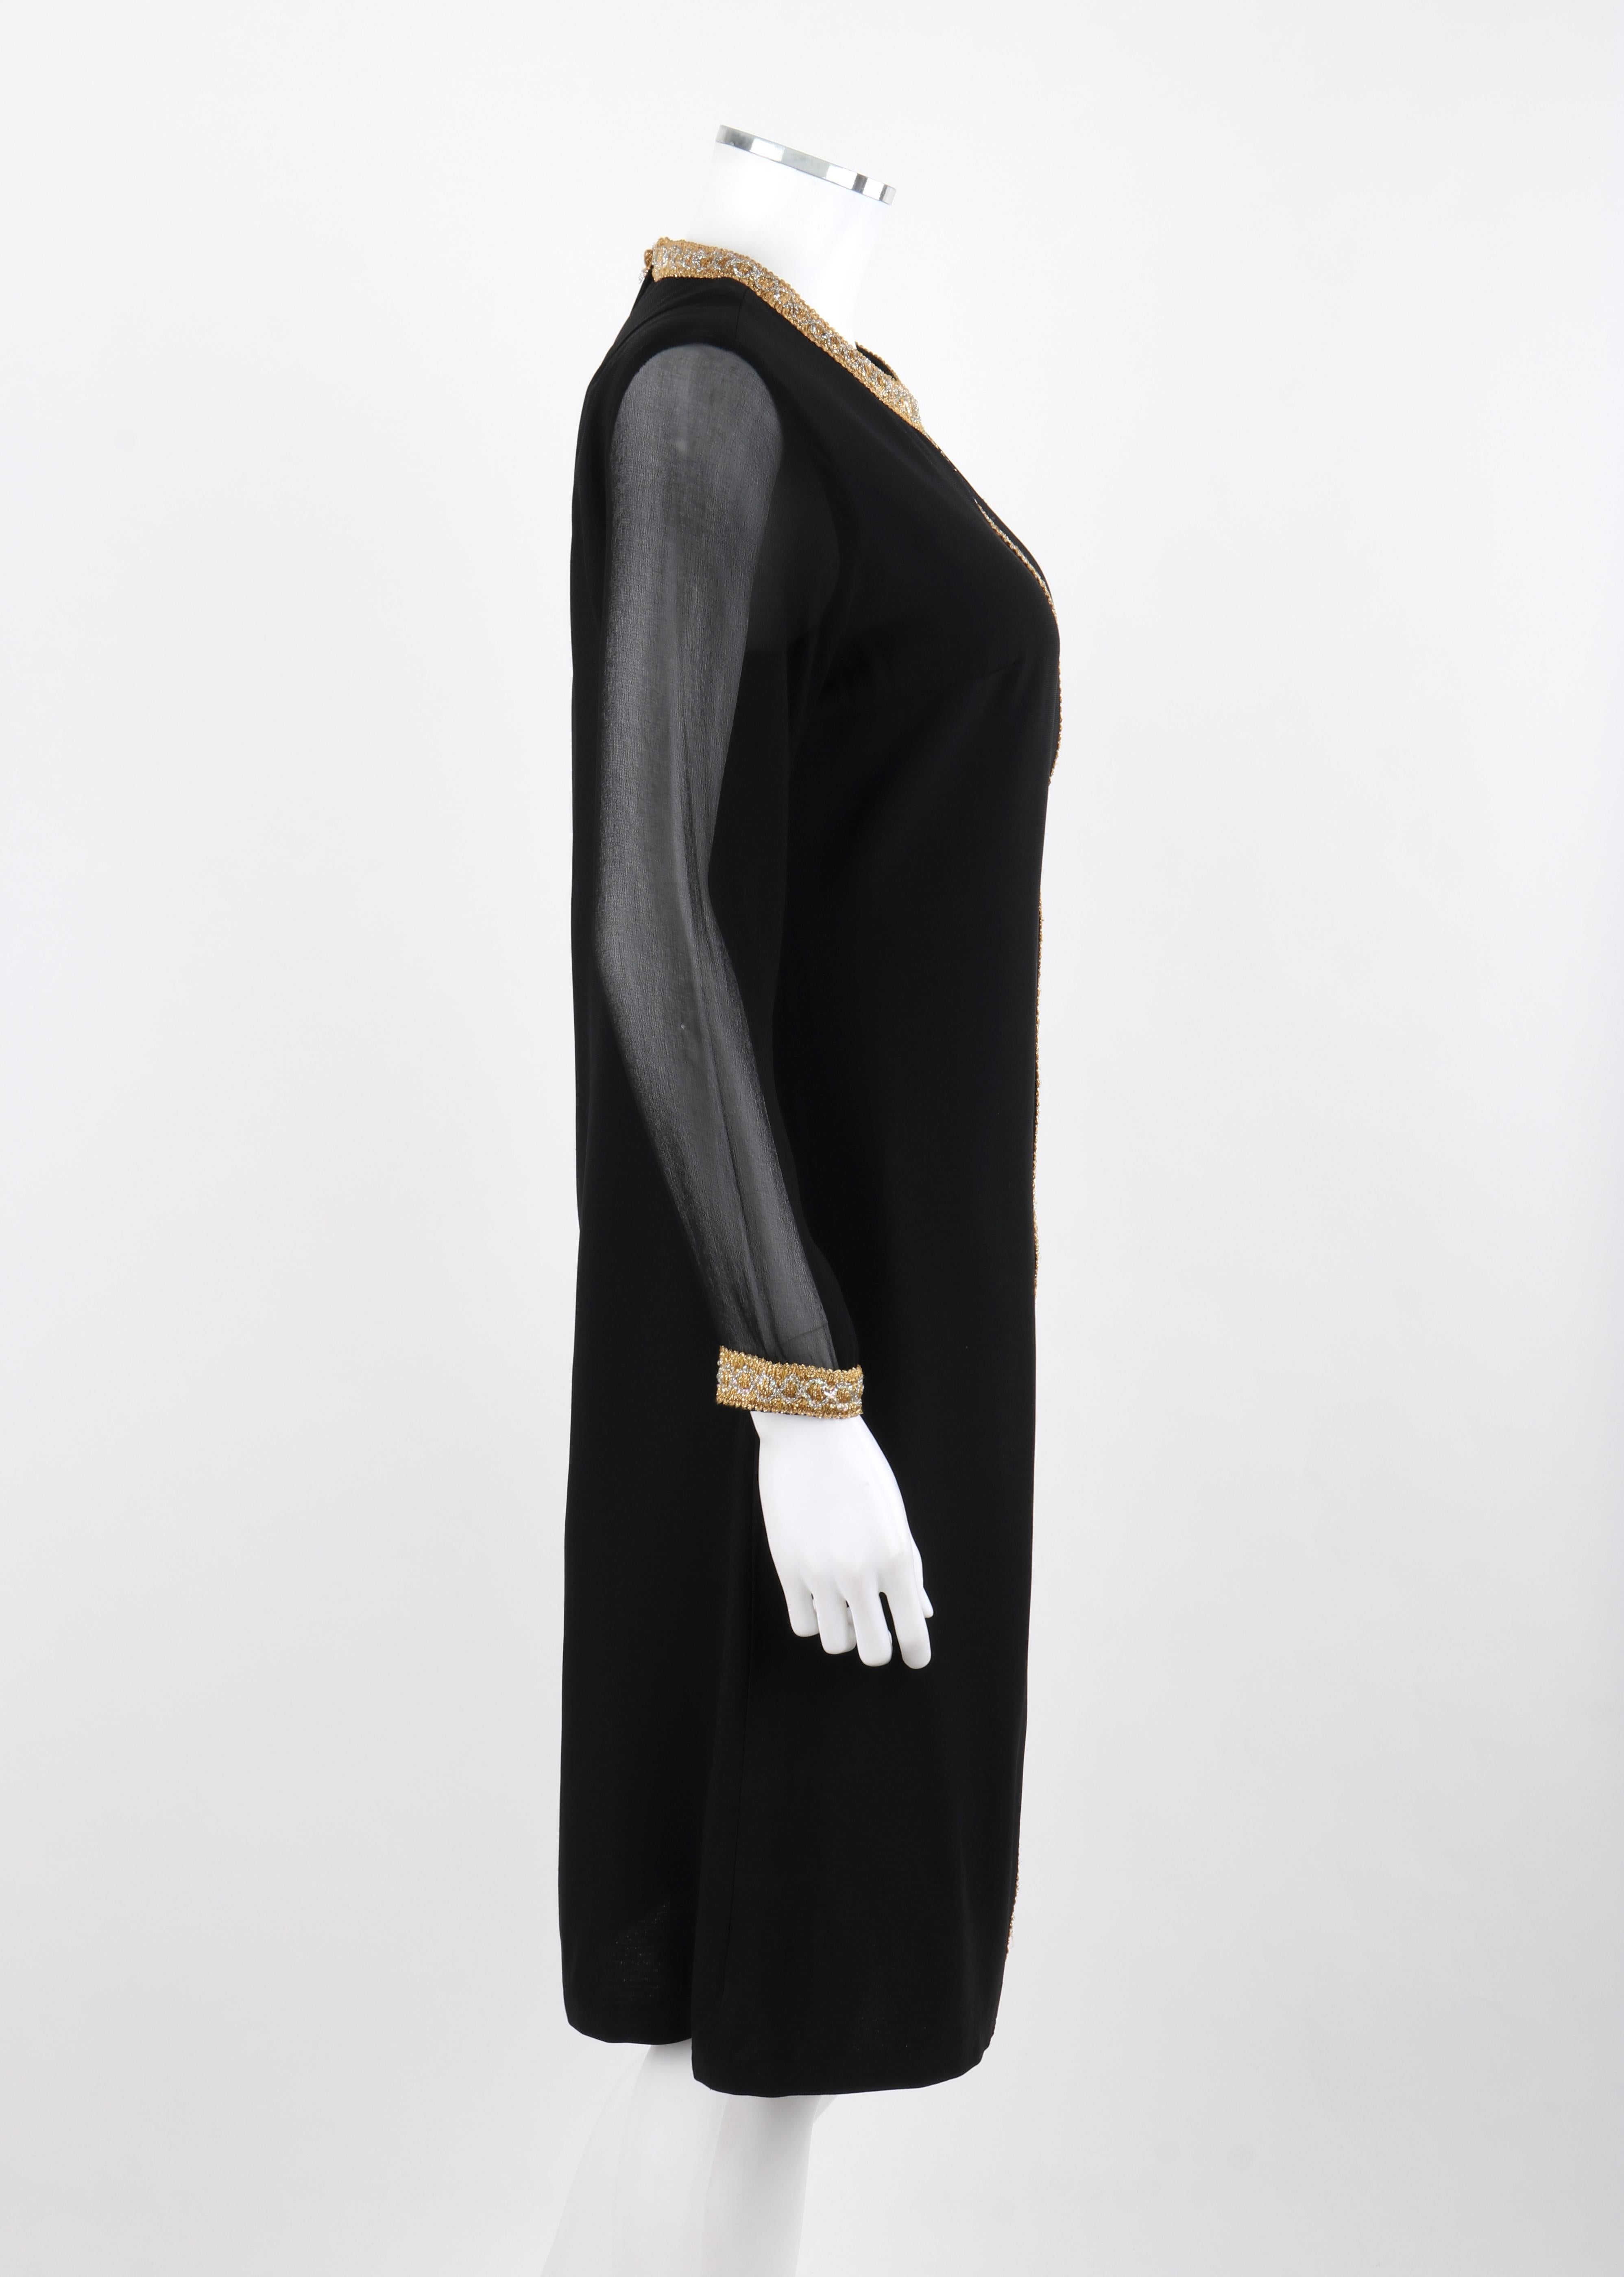 Women's GLORIA SWANSON Puritan Forever Young c.1960's Black Gold Sheer Sleeve Dress For Sale